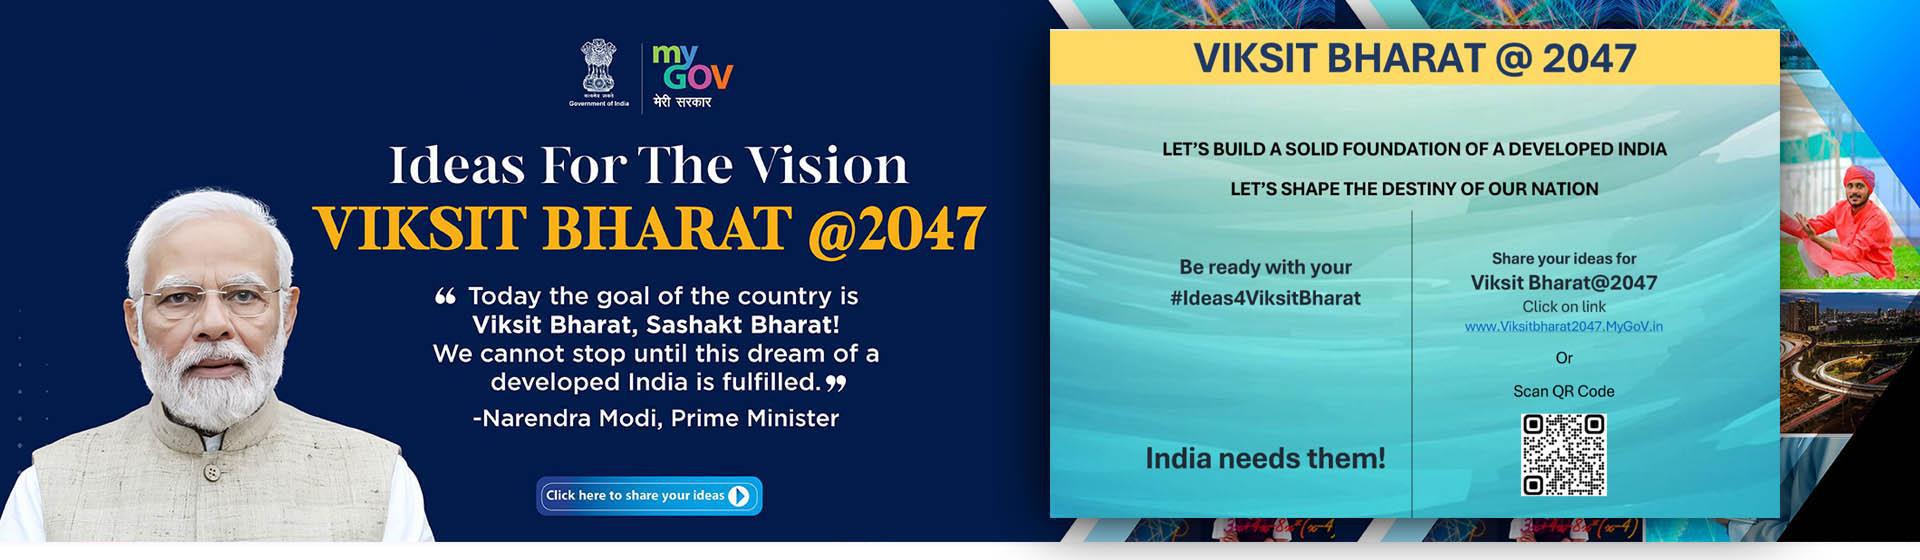 Ideas for the Mission - Vikit Bharat @ 2047